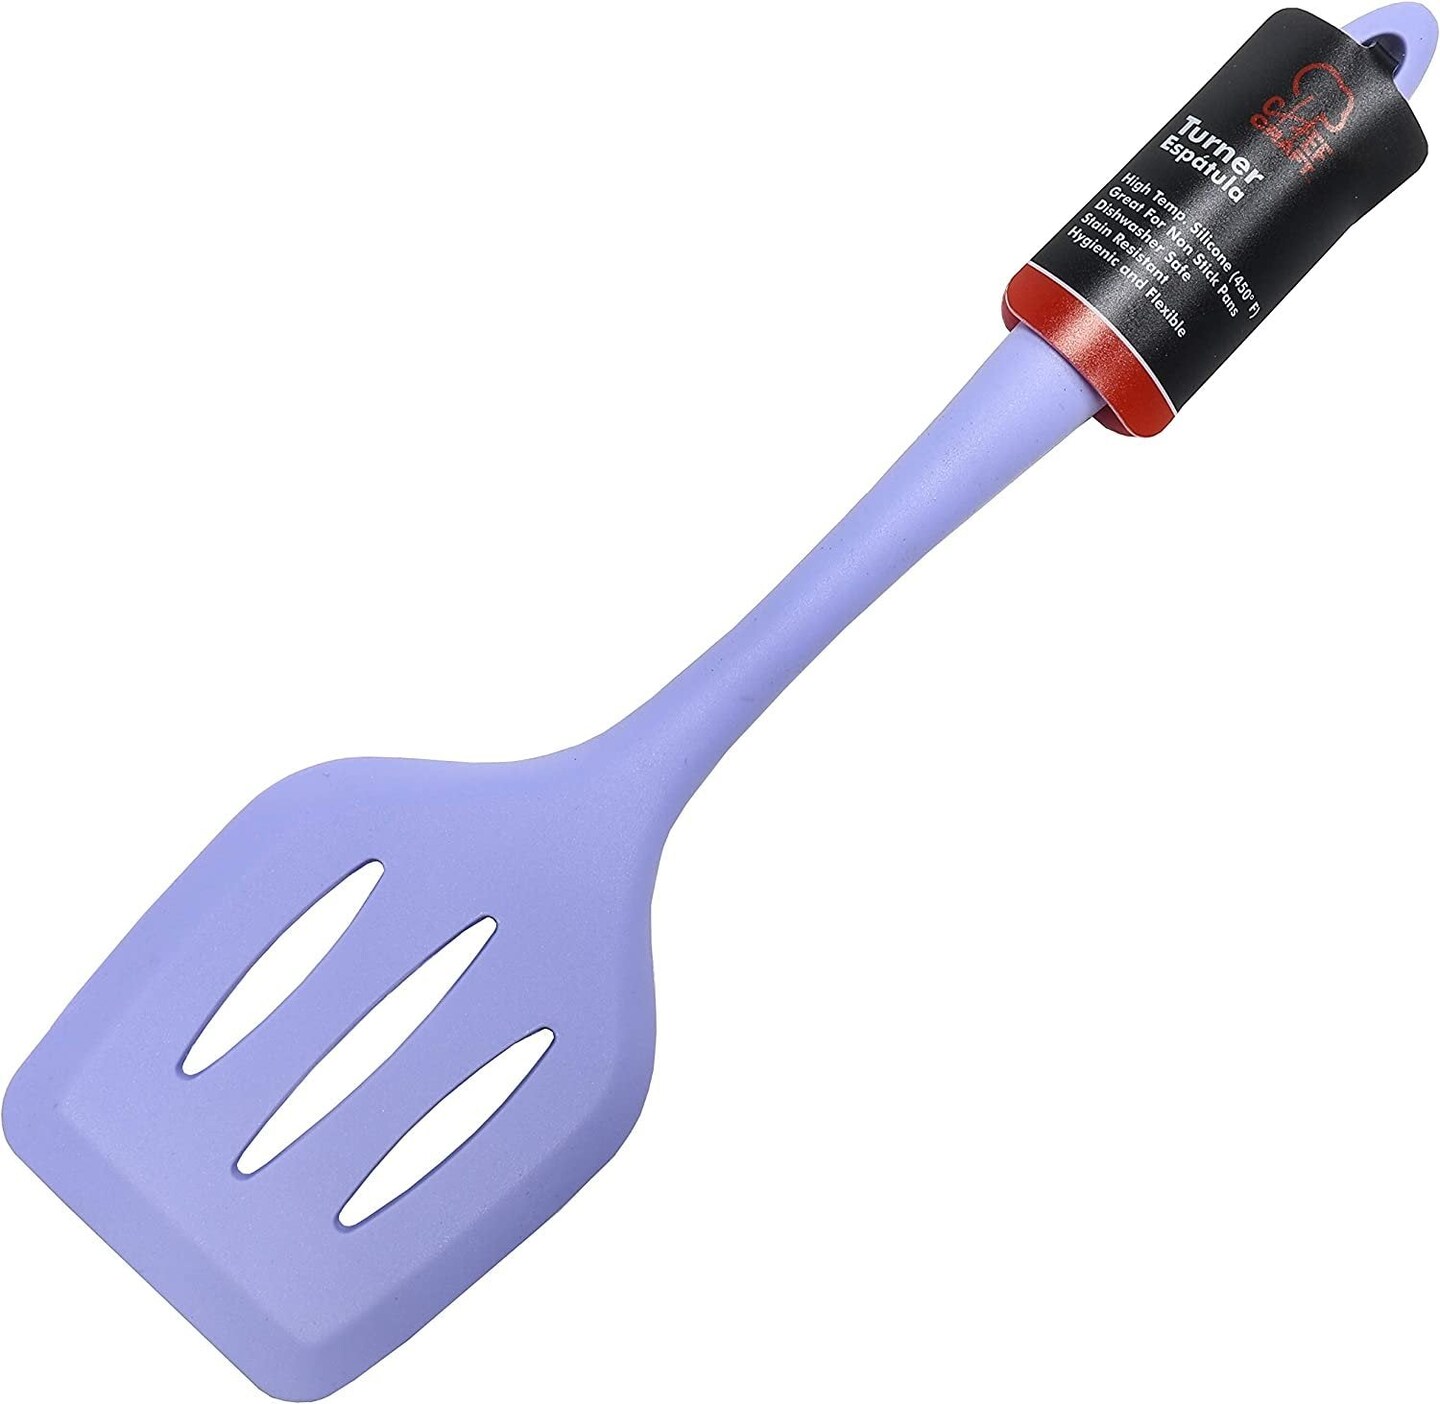 Heat Resistant Non-Stick Cooking Utensils Stain Resistant Silicone